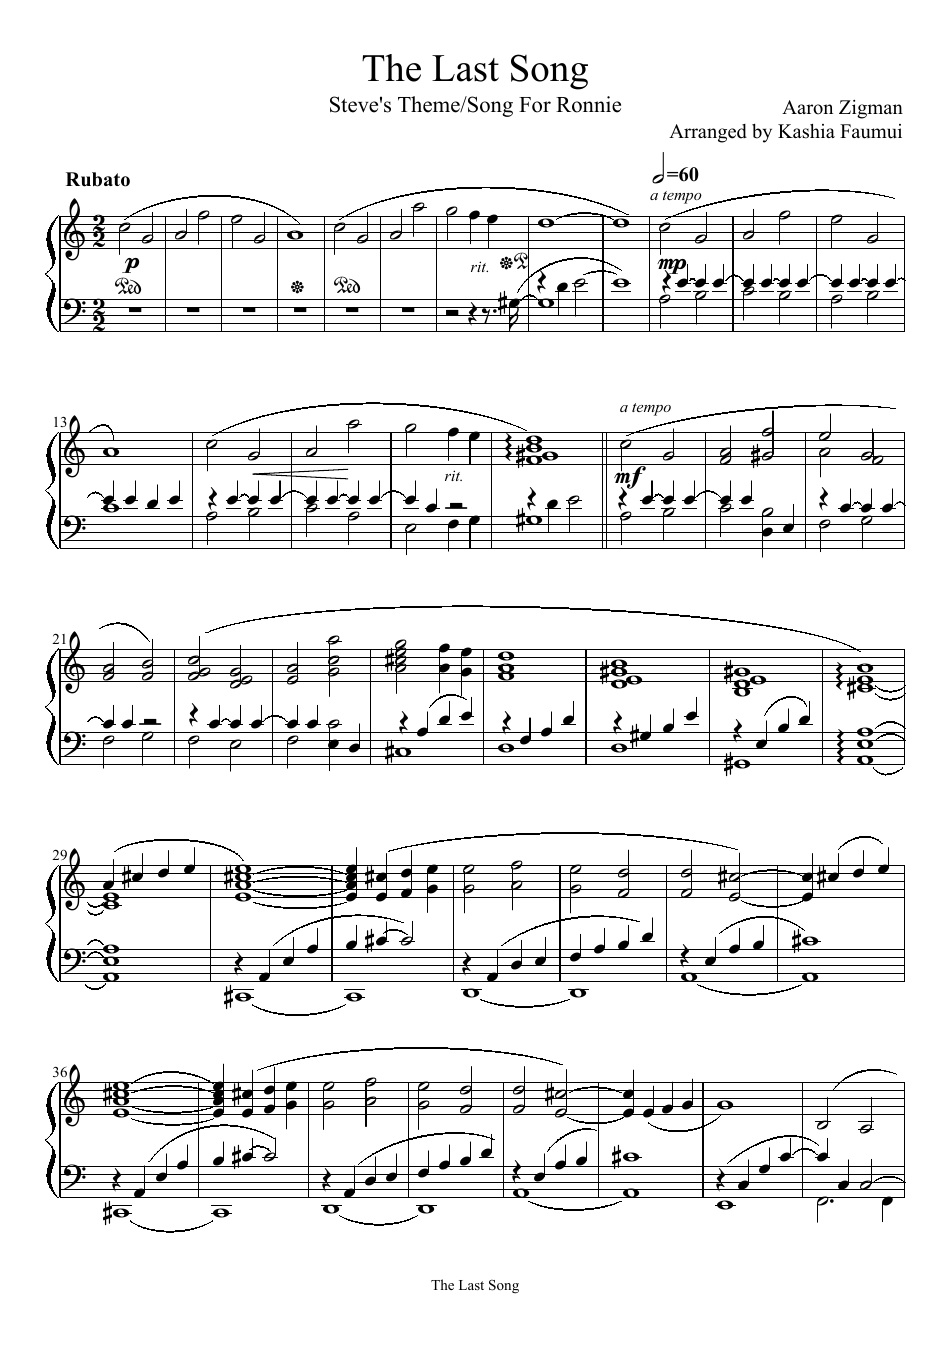 Aaron Zigman - The Last Song (Steve's Theme/Song for Ronnie) Piano Sheet Music image preview